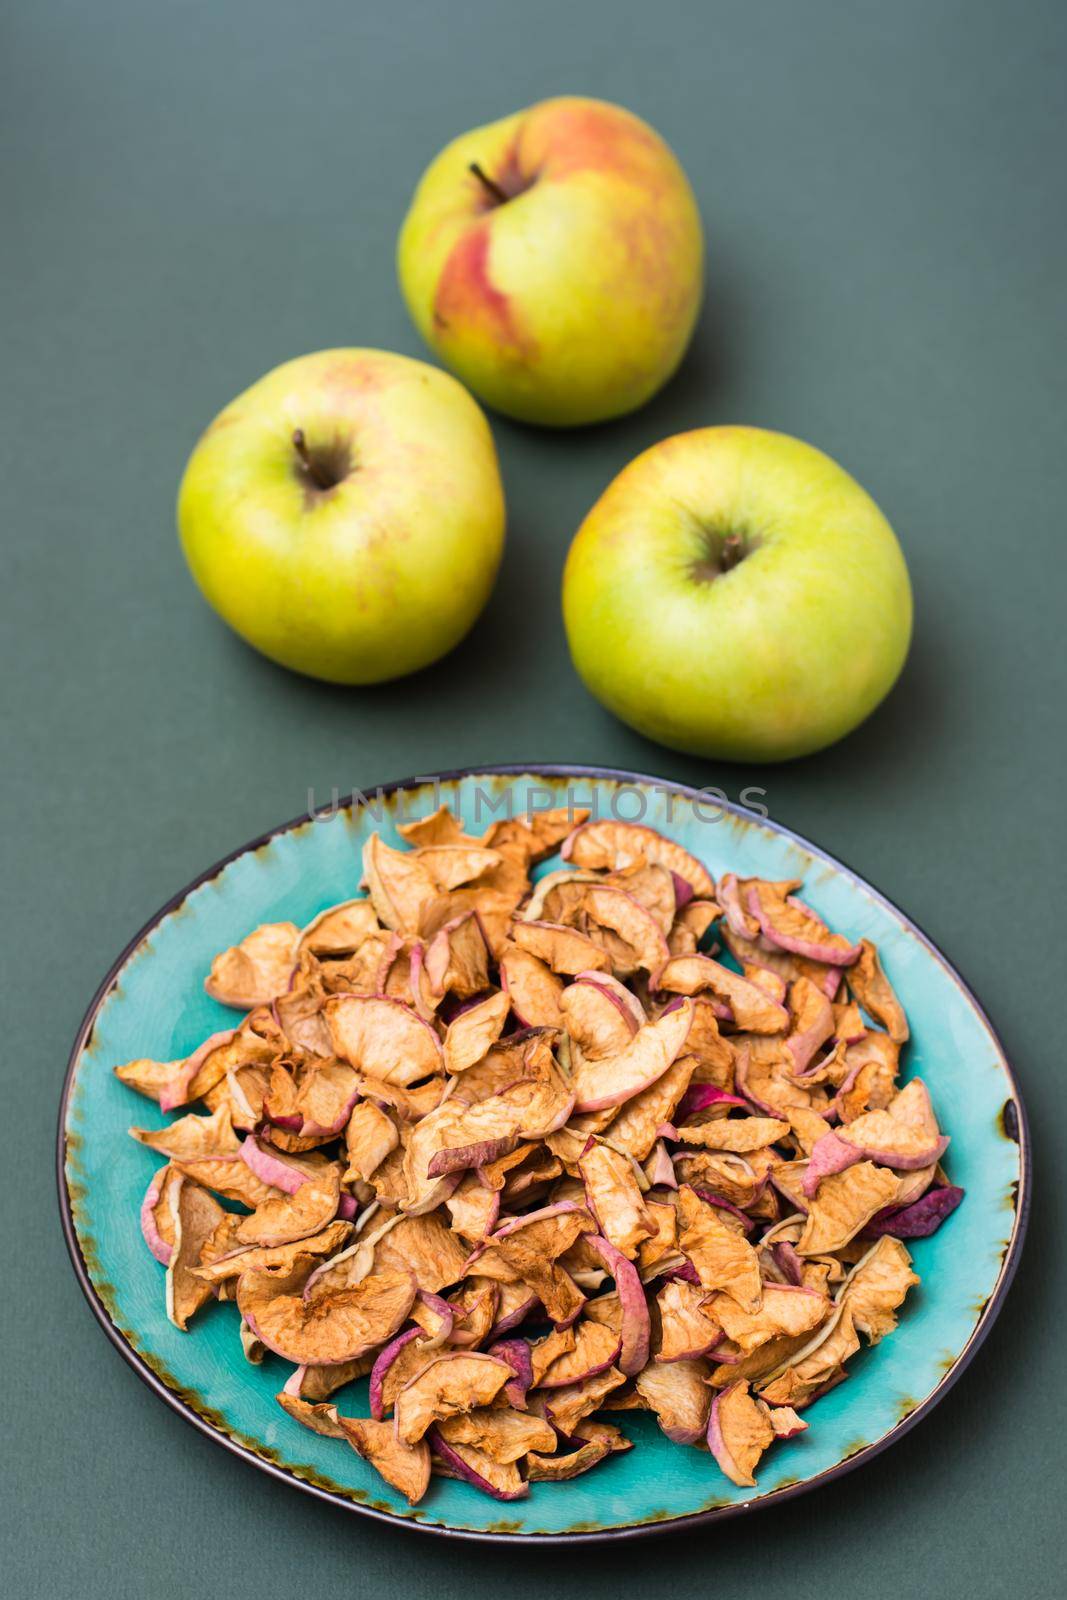 Slices of dry apples on a plate and fresh apples on a green background. Healthy eating. Vertical view